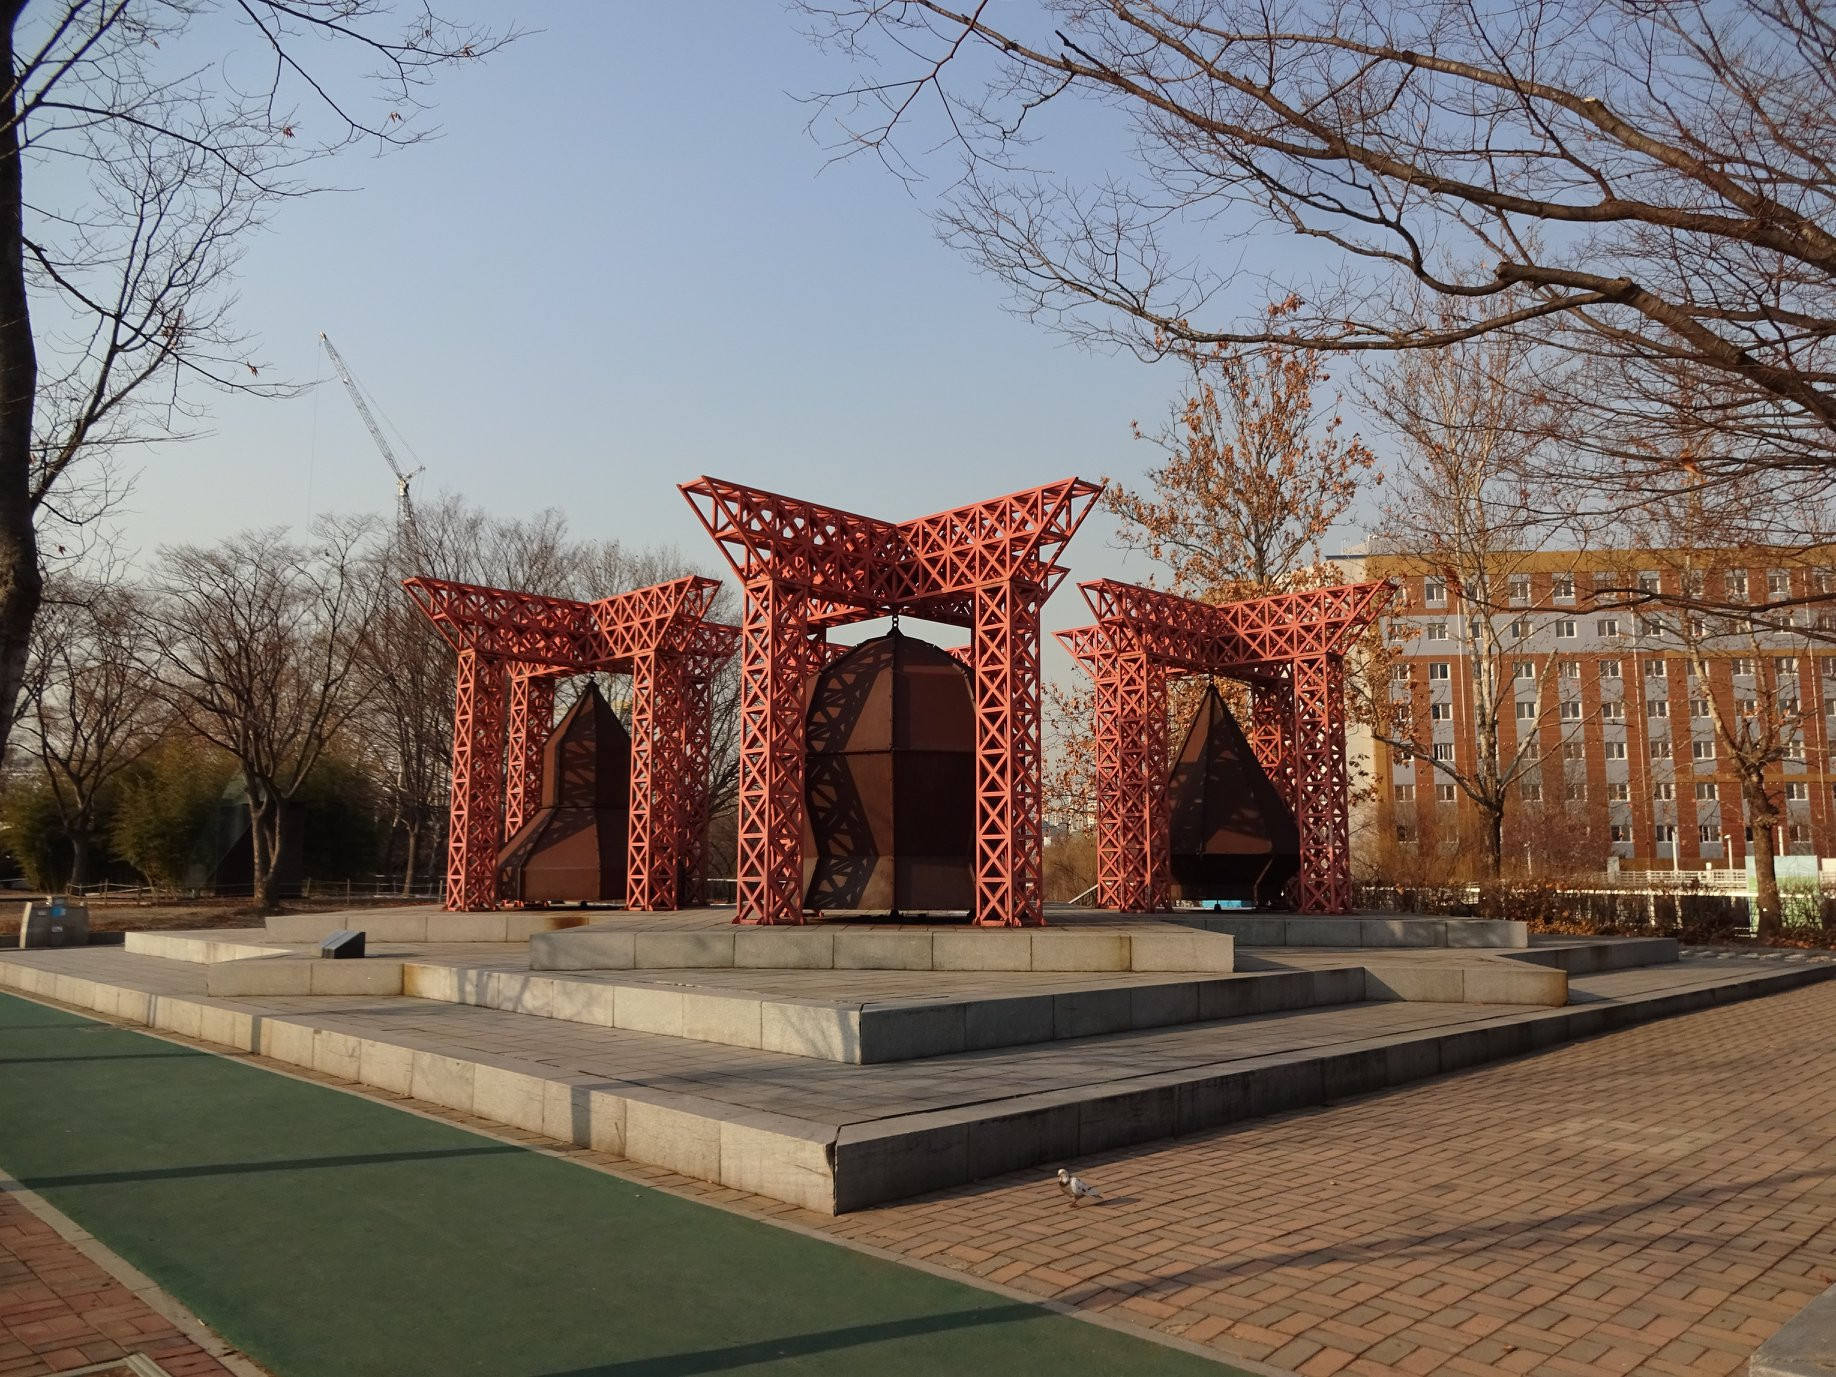 Artistic works created for the 1988 Seoul Olympics are still on public display in the city © ITG